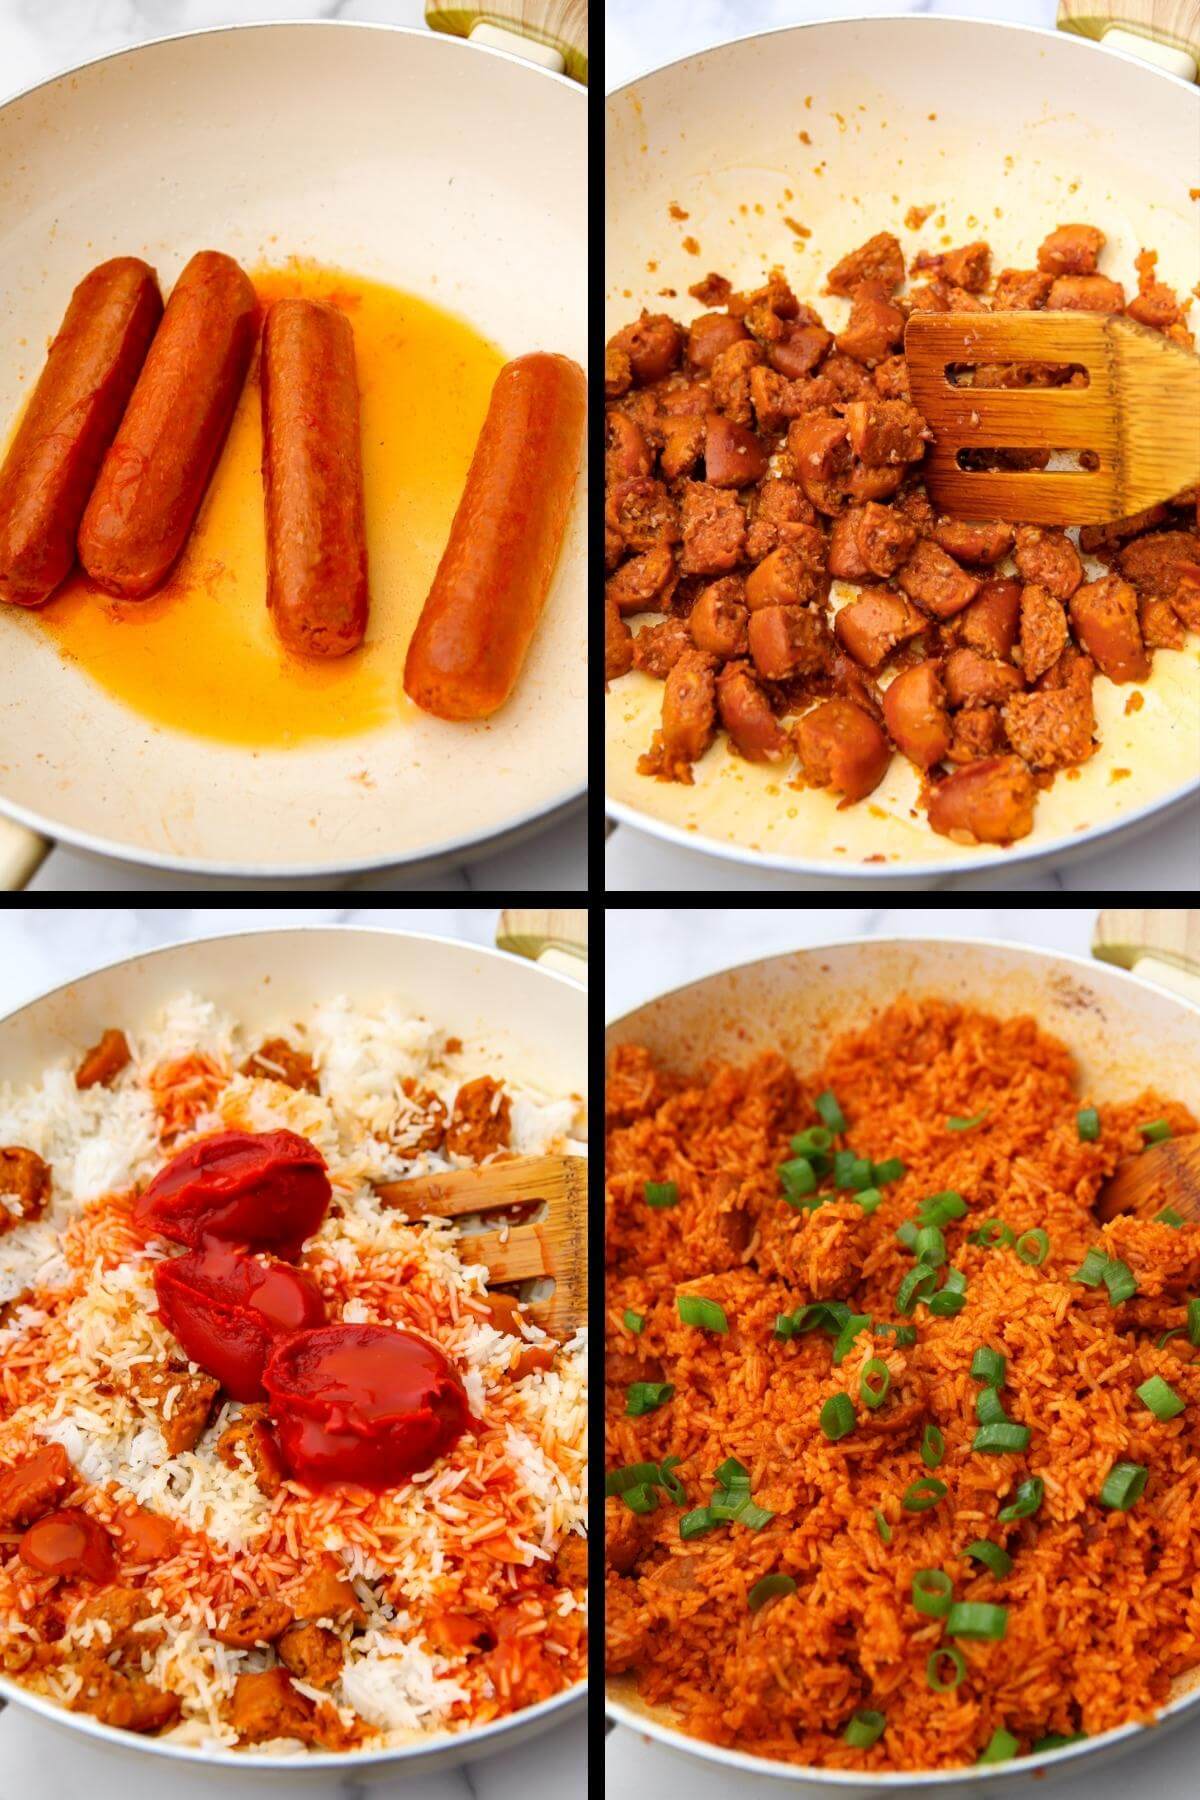 A collage of 4 images showing the process steps for making vegan red rice with vegan sausages, rice, red hot, and tomato paste being mixed together.